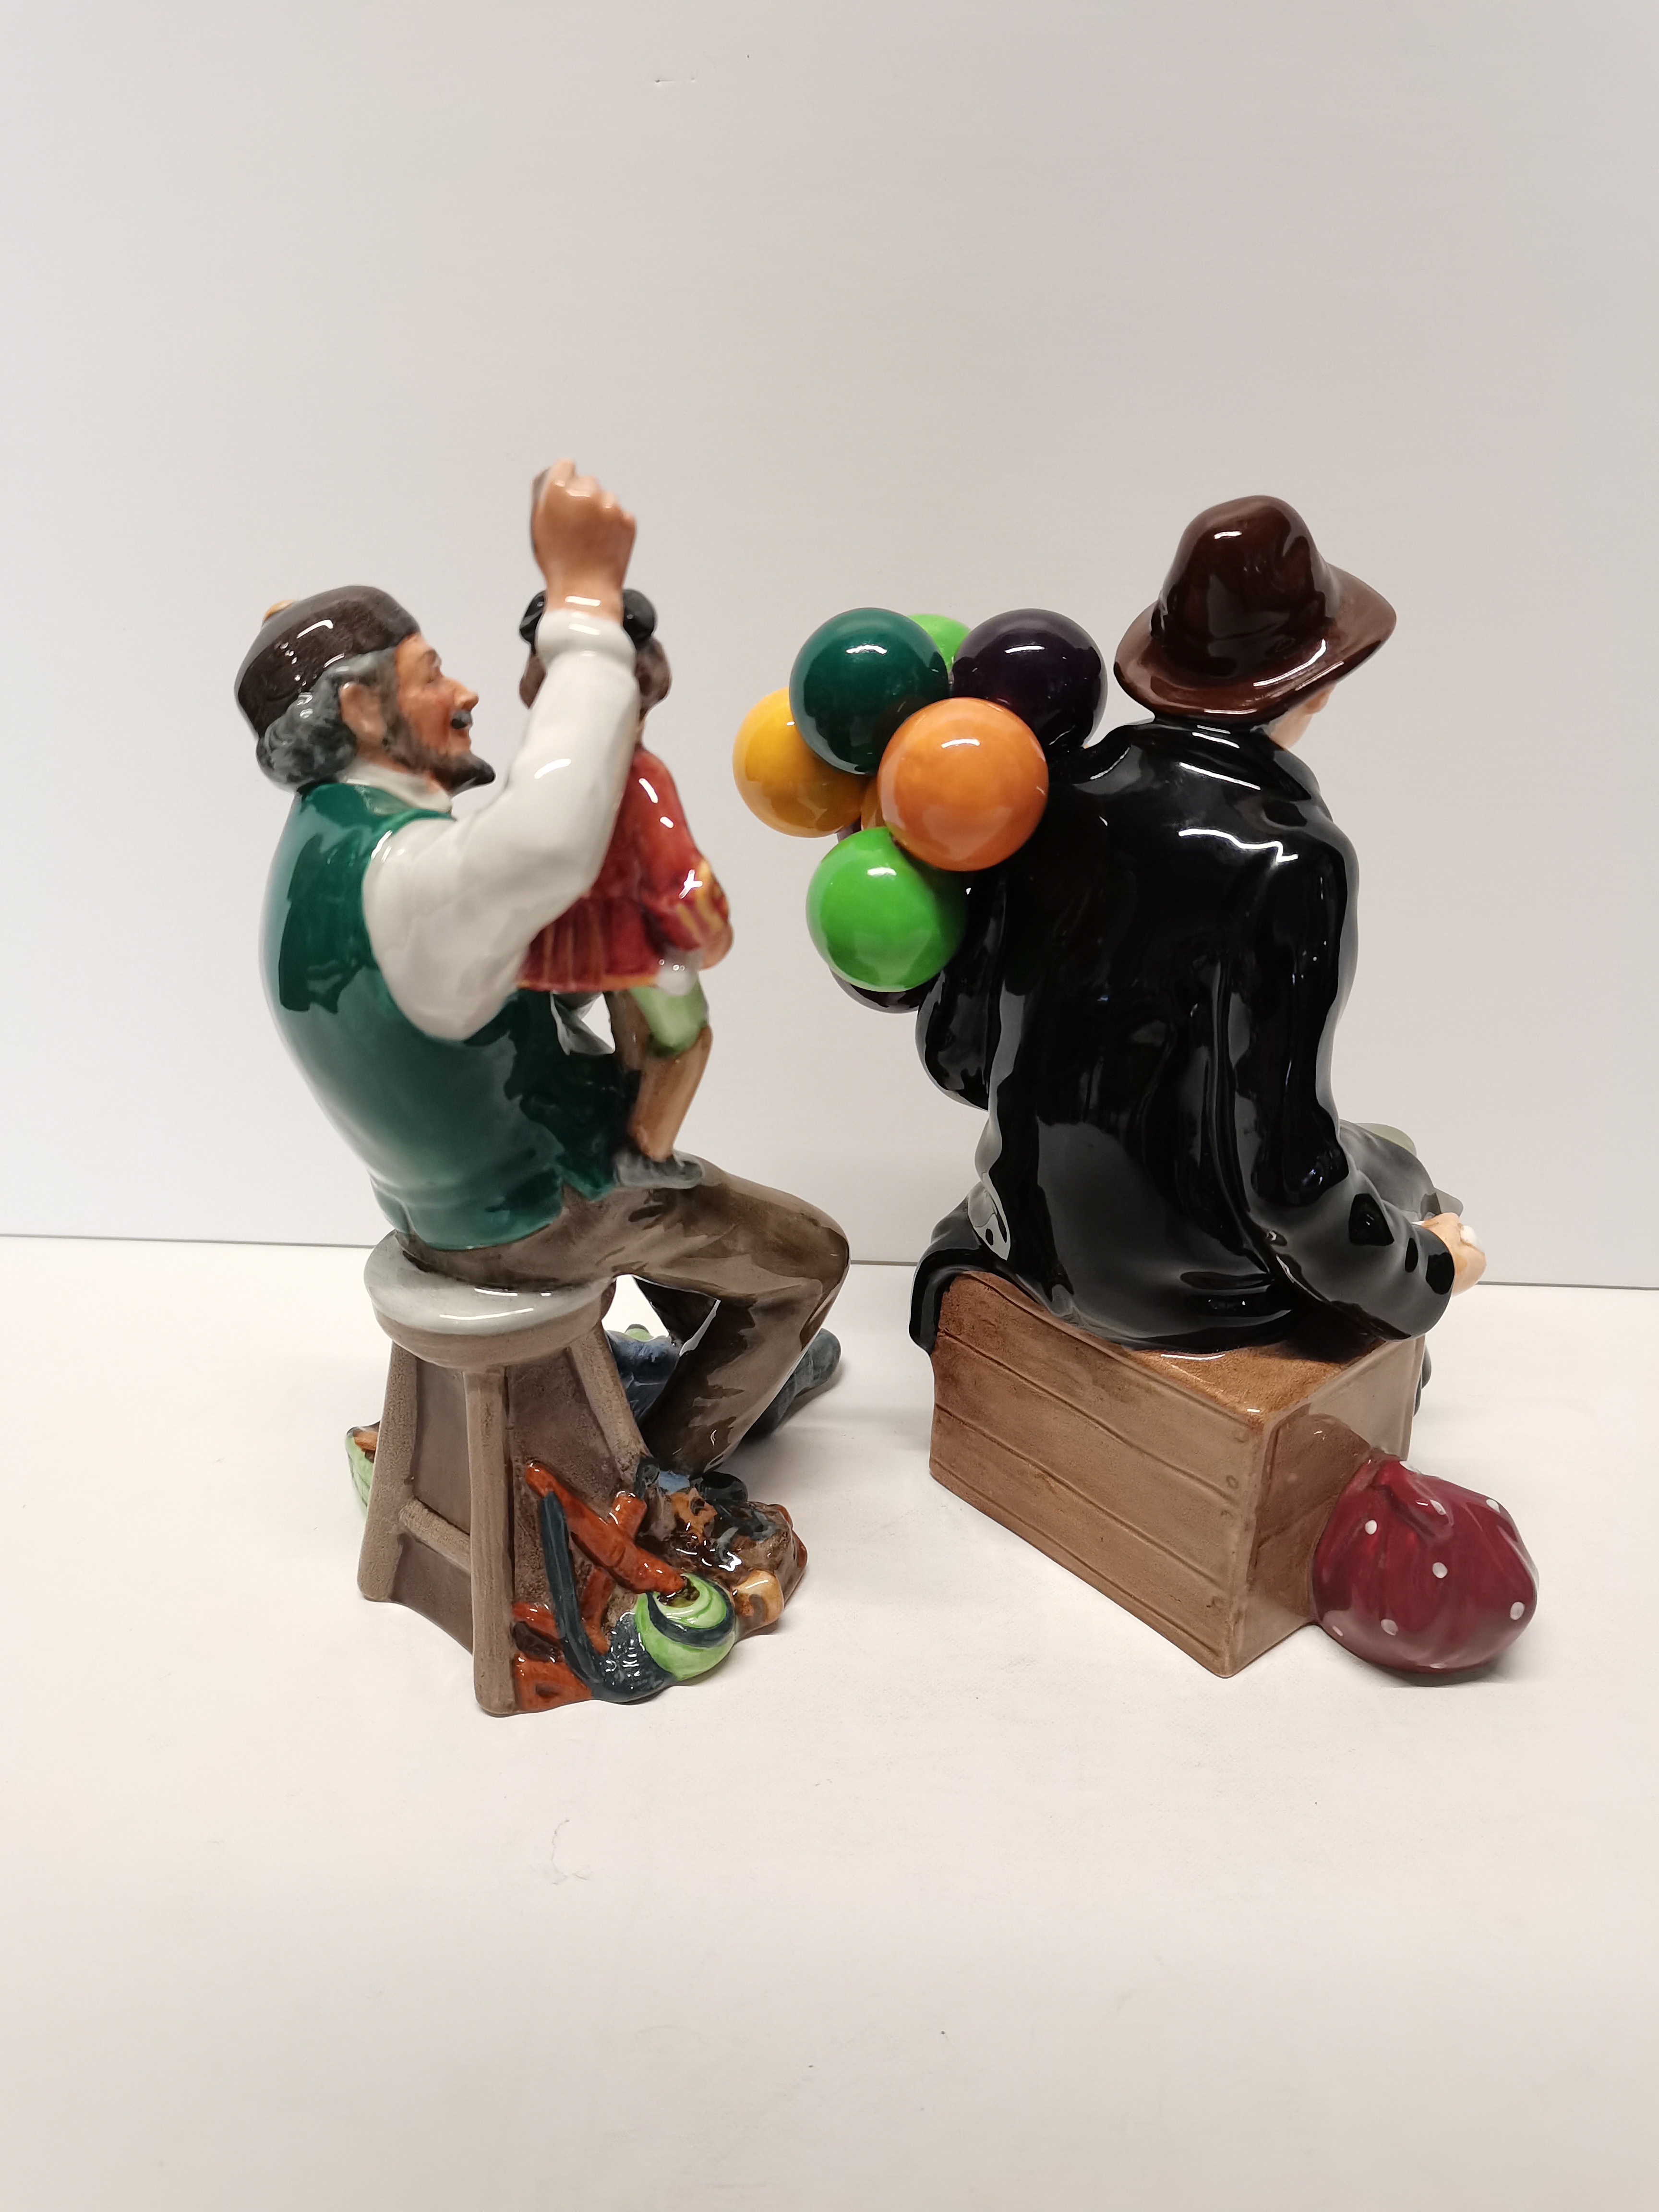 2 Royal Doulton Figures HN1954 "The Balloon Man" and HN2253 "The Puppetmaker" - Image 2 of 3